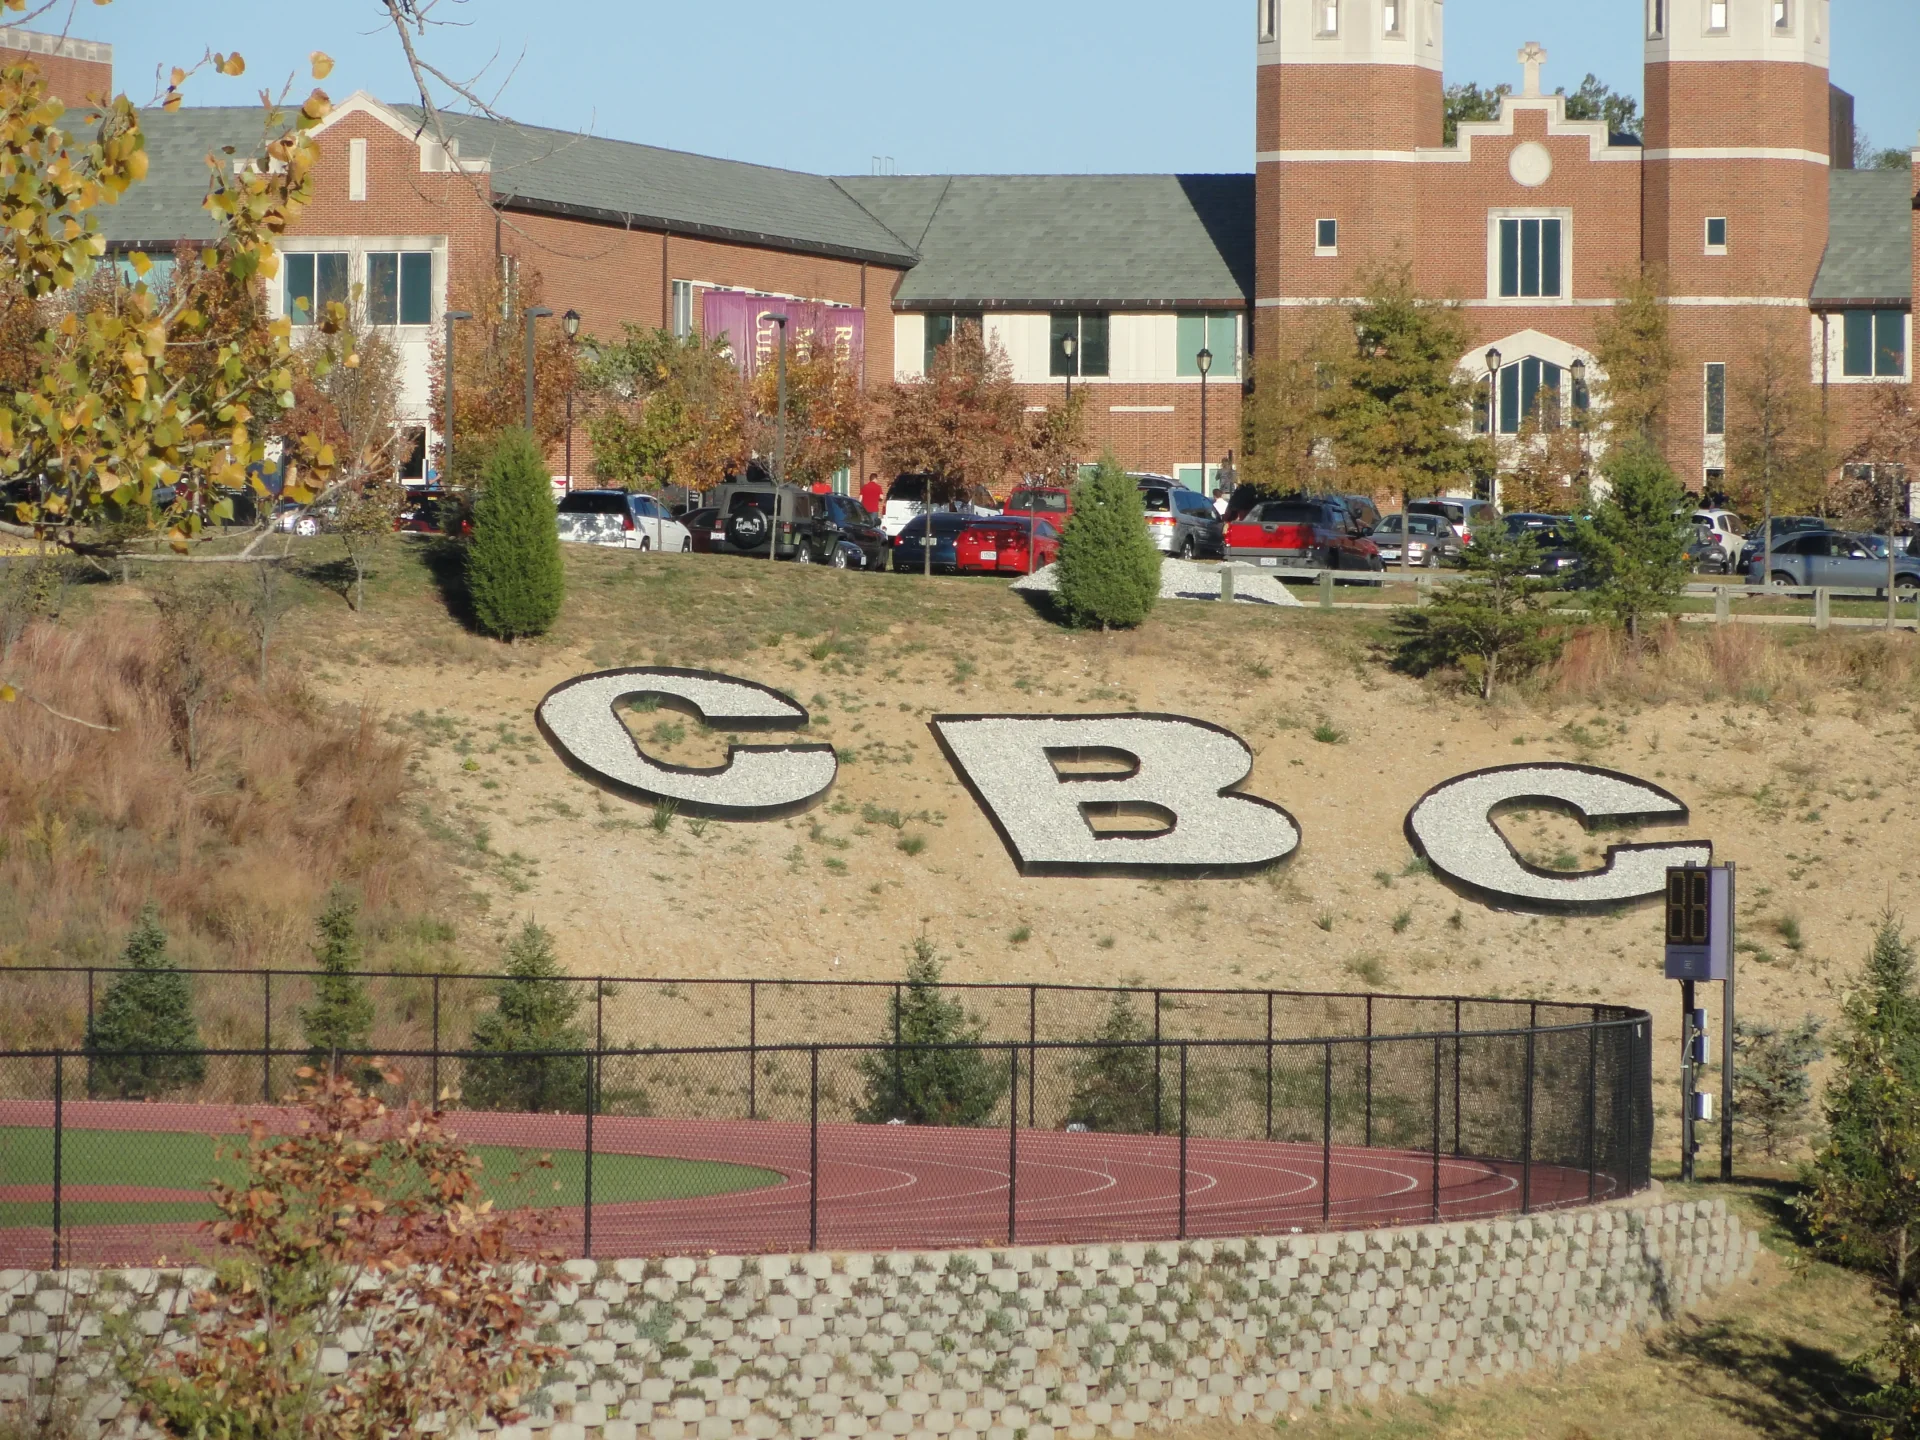 Latest CBC High School Leaked video Viral Christian Brothers College on Twitter and Reddit